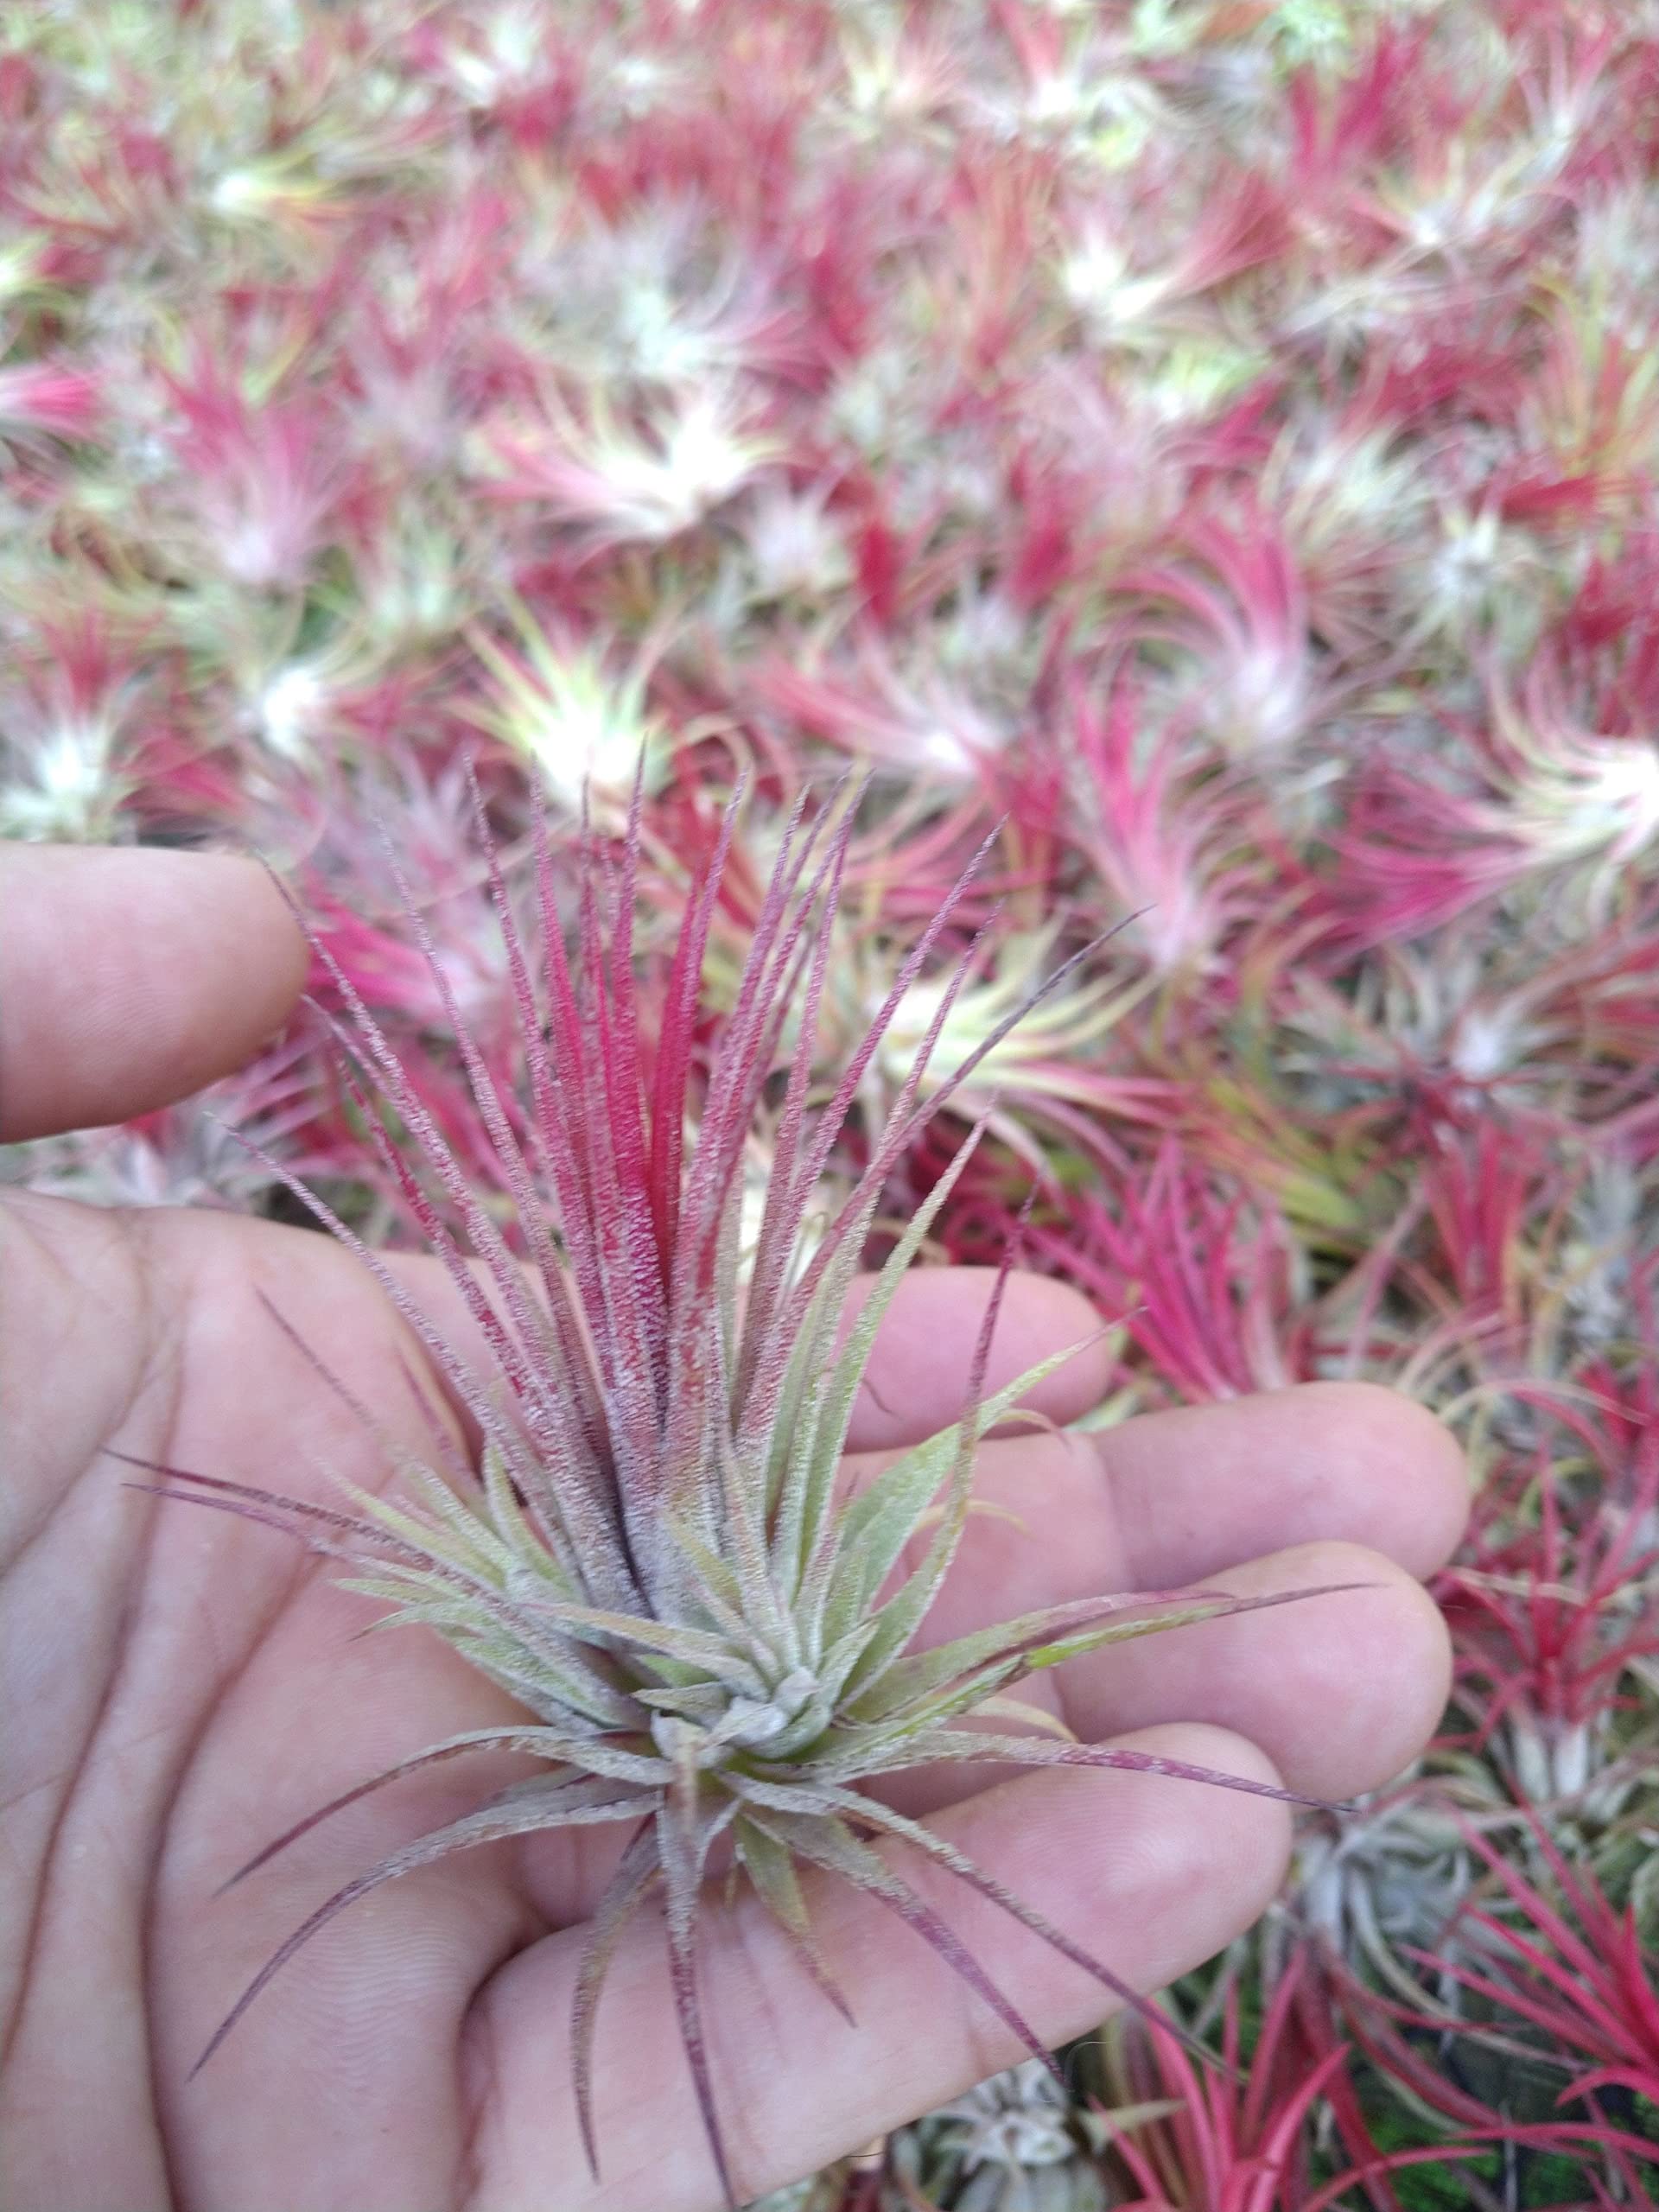 It Blooms Rainforest Grown One RED Ionantha Fuego Air Plants - Live Tillandsia - 1.5 to 3 inches - 30 Day Guarantee